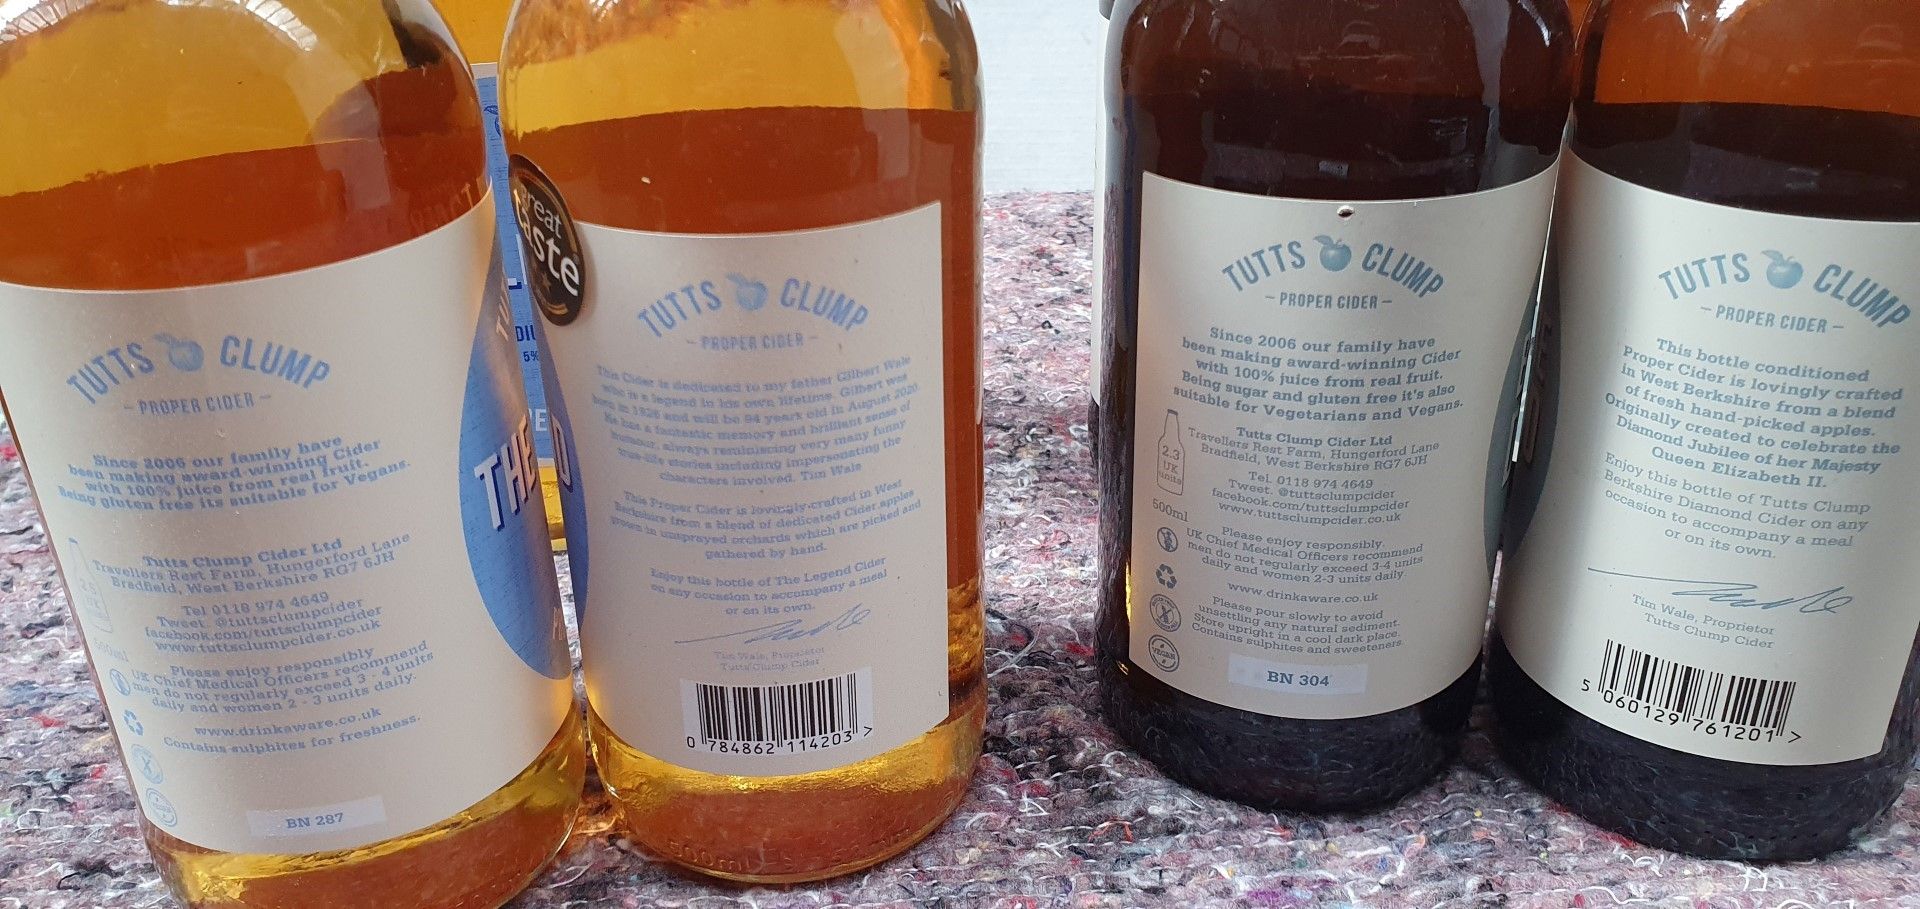 7 x Bottles of Tutts Clump Medium Dry Cider - Includes The Legend 5% and Berkshire Diamond 4.5% - Image 2 of 4